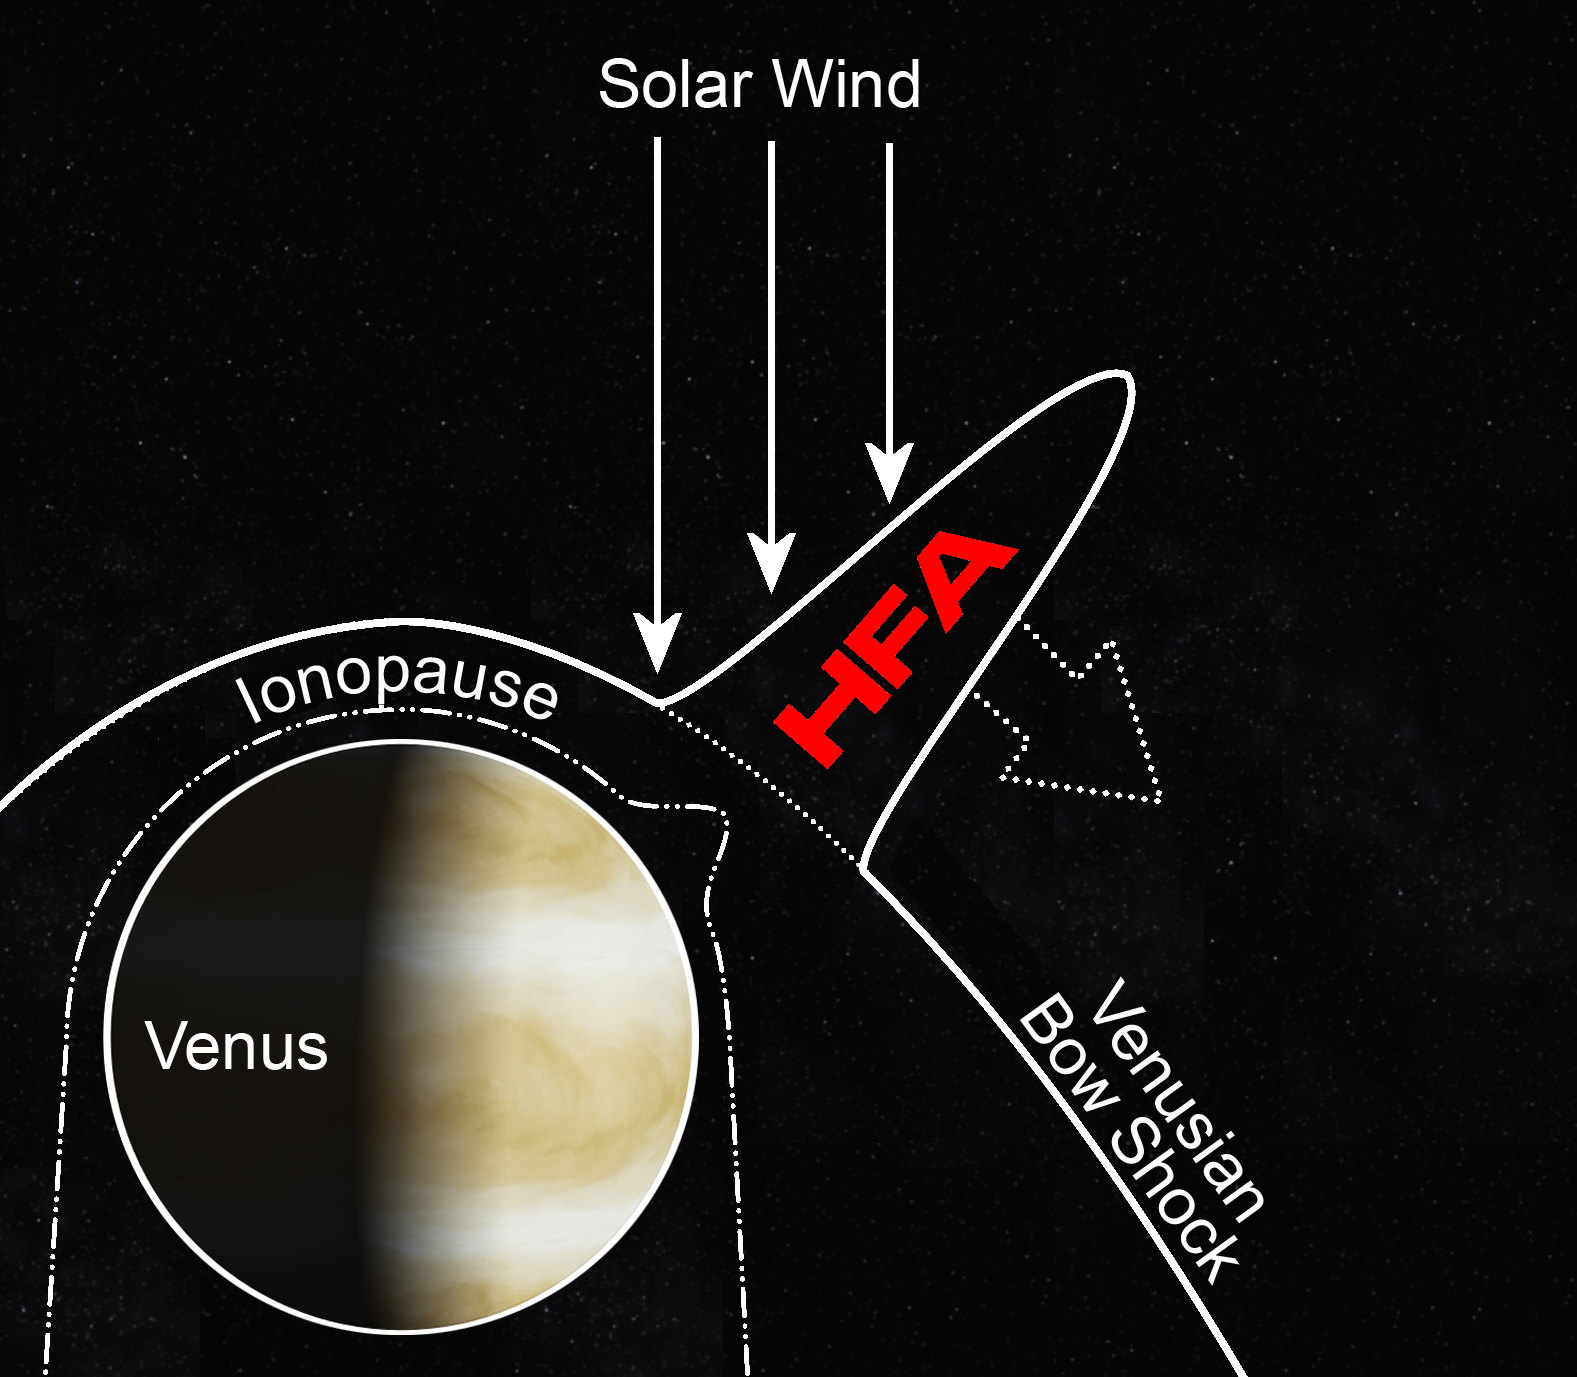 hot-flow-anomalies-surprising-explosions-on-venus-caused-by-space-weather